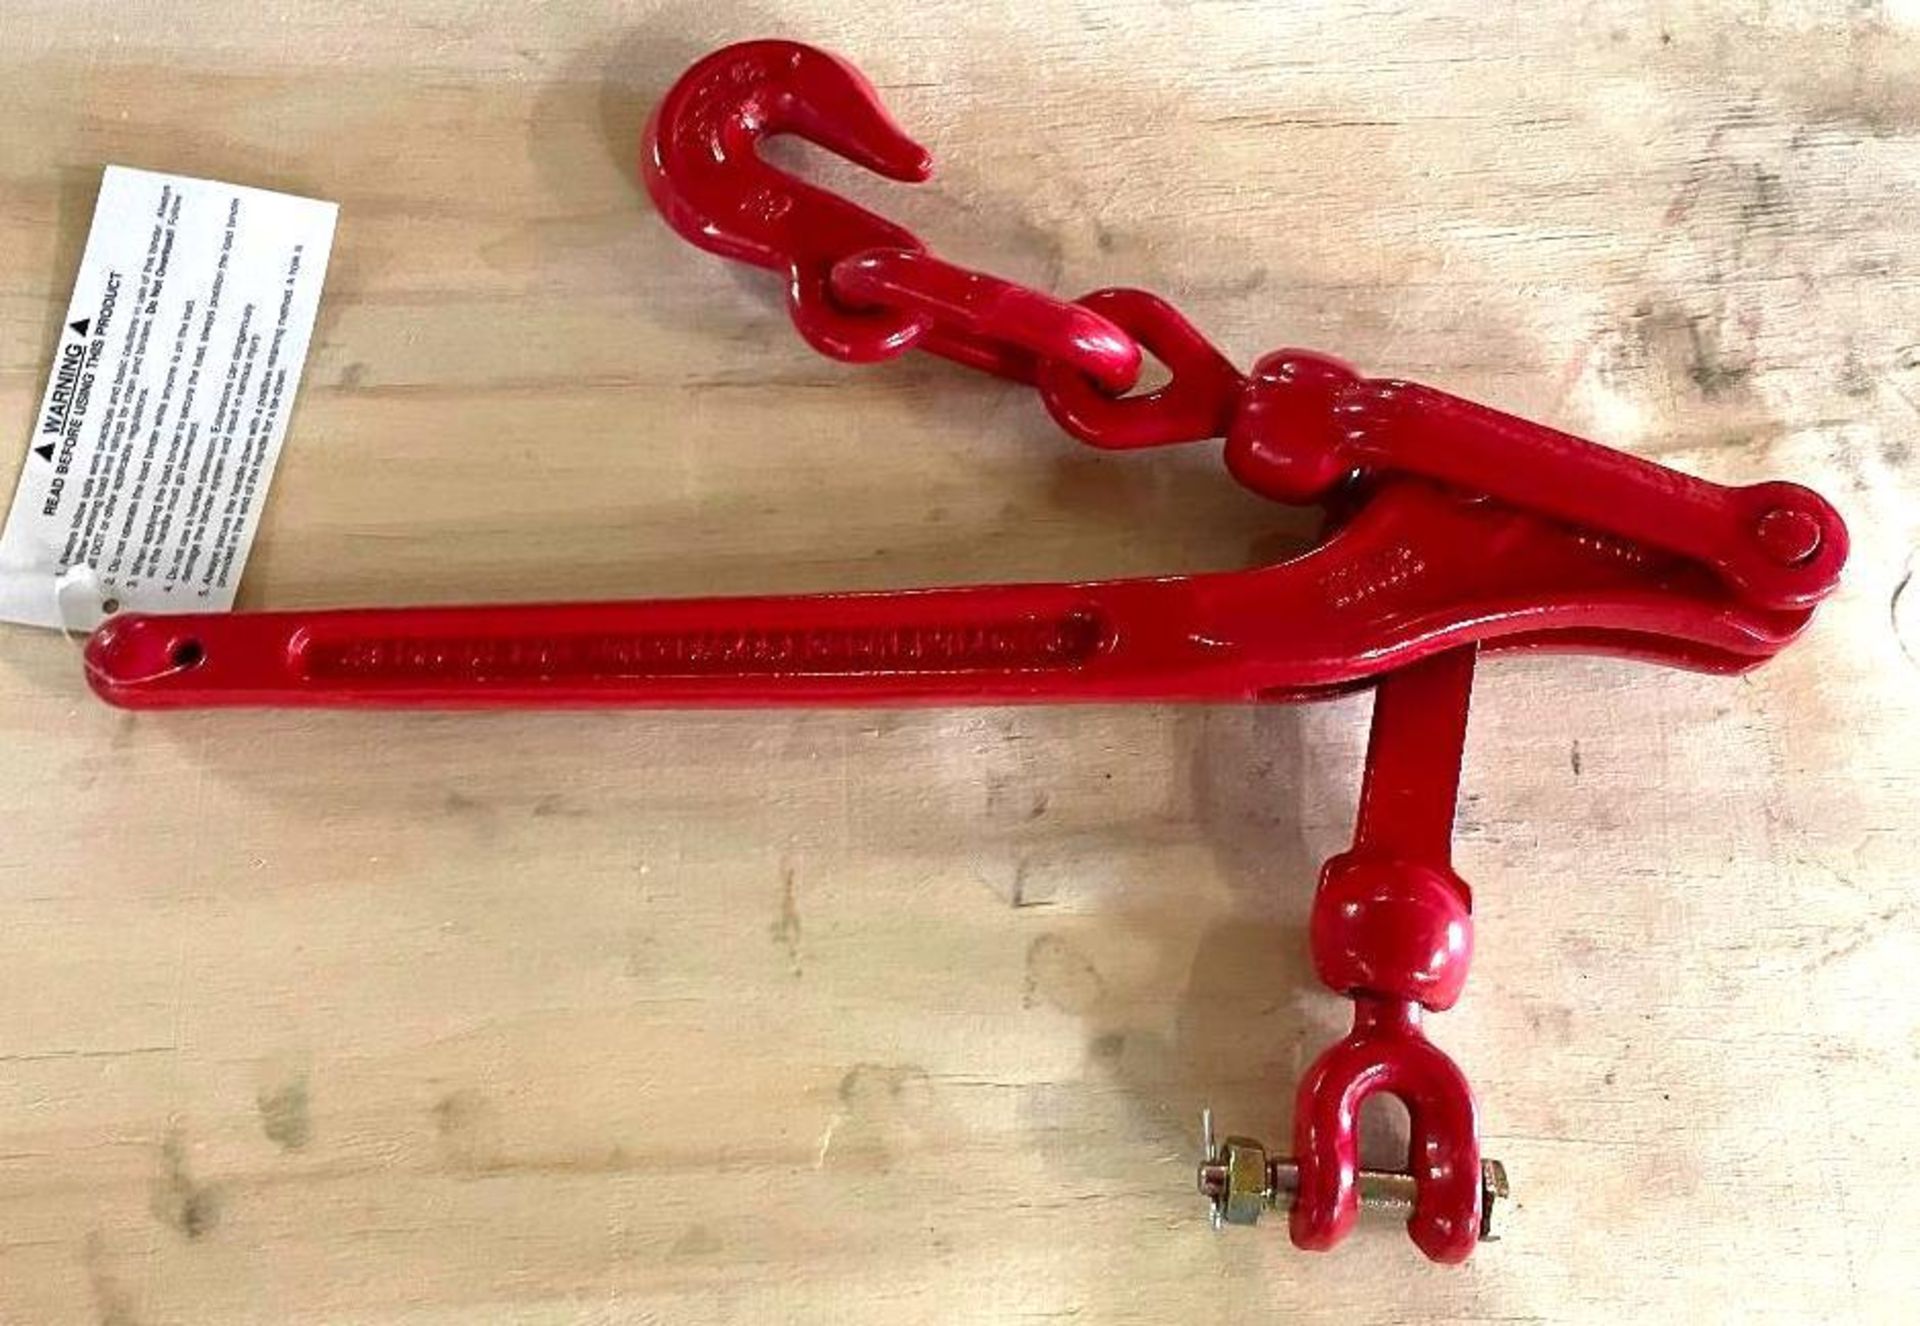 DESCRIPTION: (2) BOXES OF 5/16 - 3/8" LEVER LOAD BINDER GRAB HOOK AND CLEVIS. (5) PER BOX, 10 IN LOT